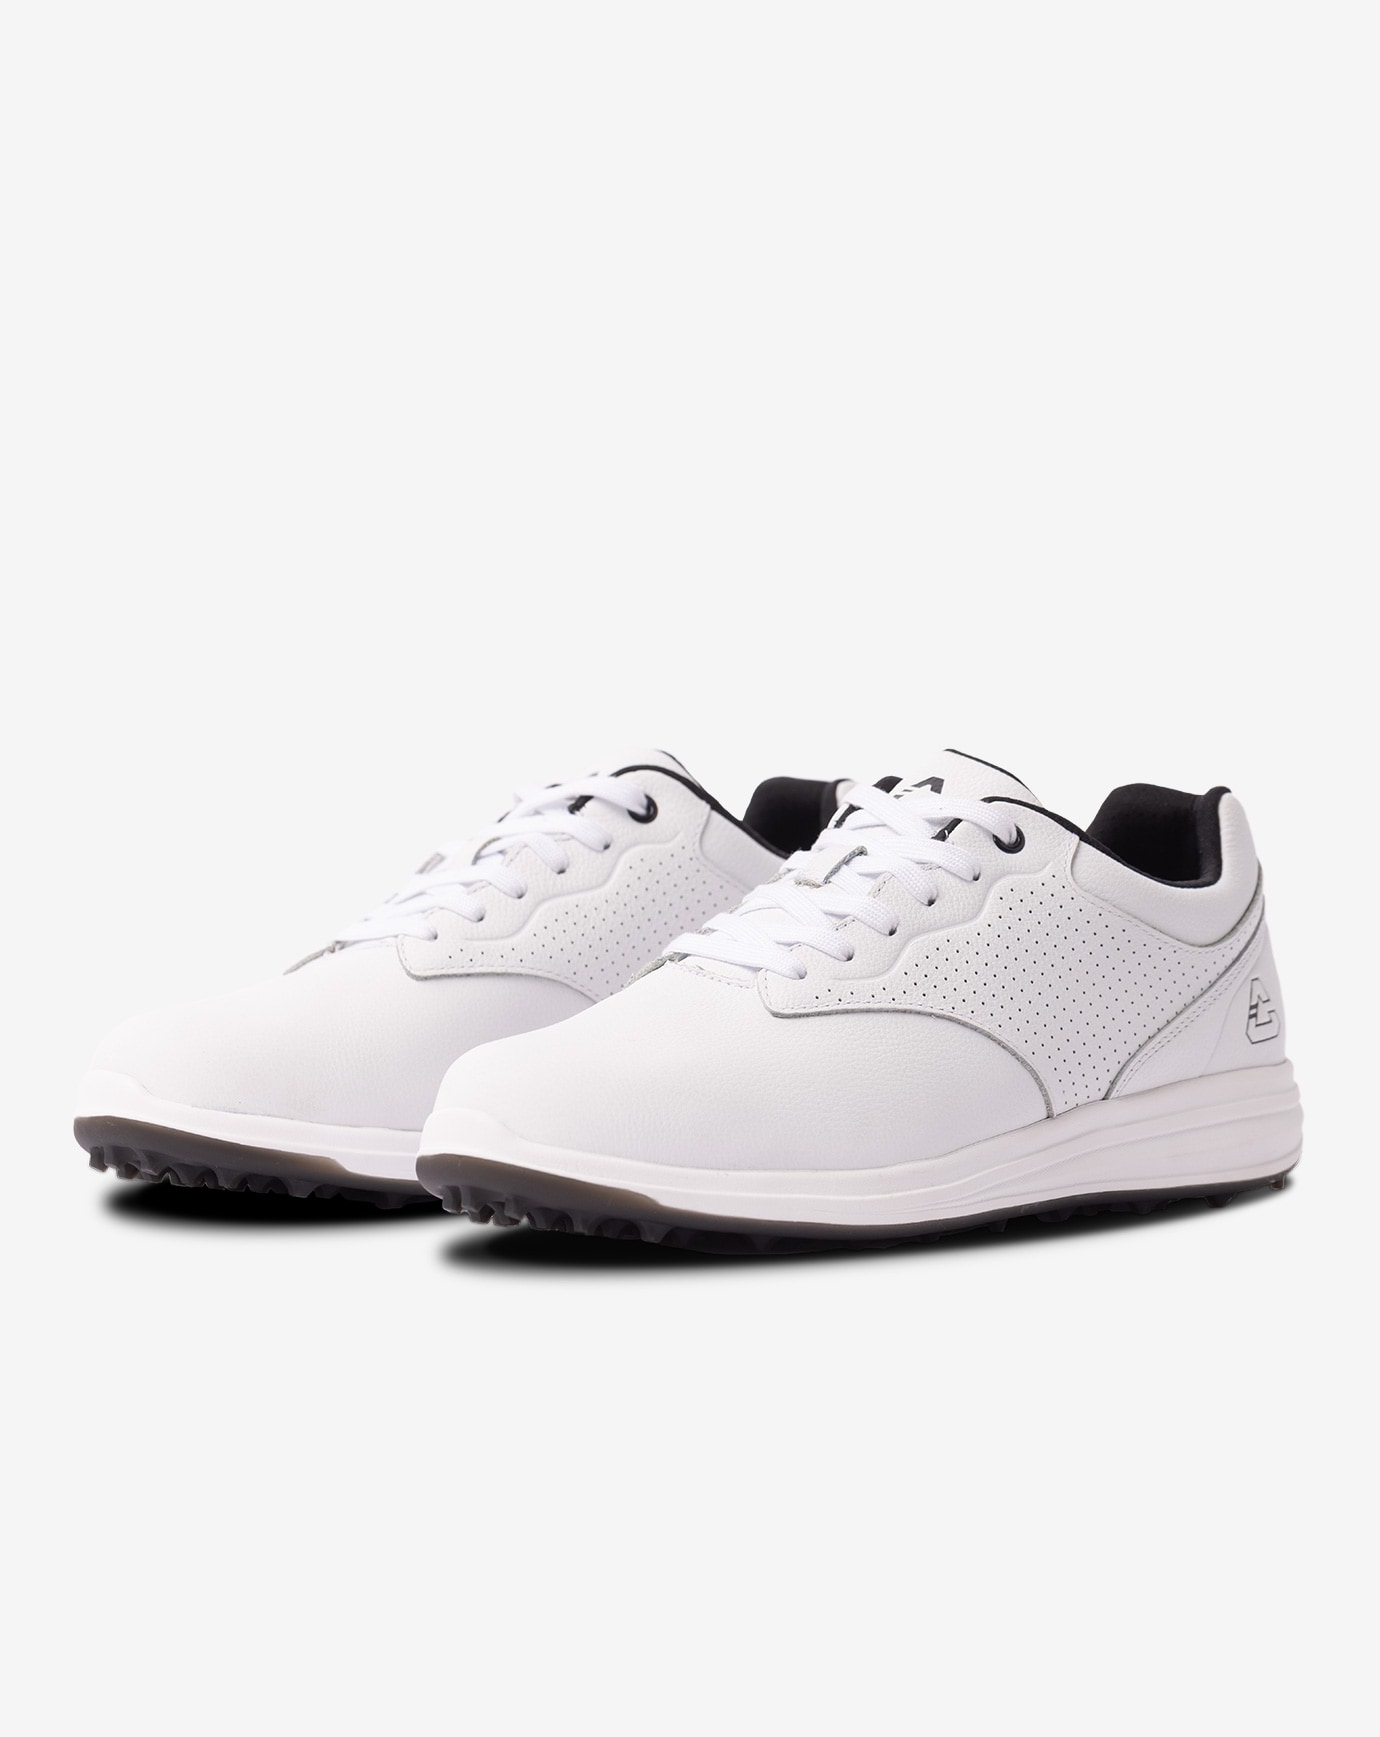 THE MONEYMAKER LUX SPIKELESS GOLF SHOE Image Thumbnail 5